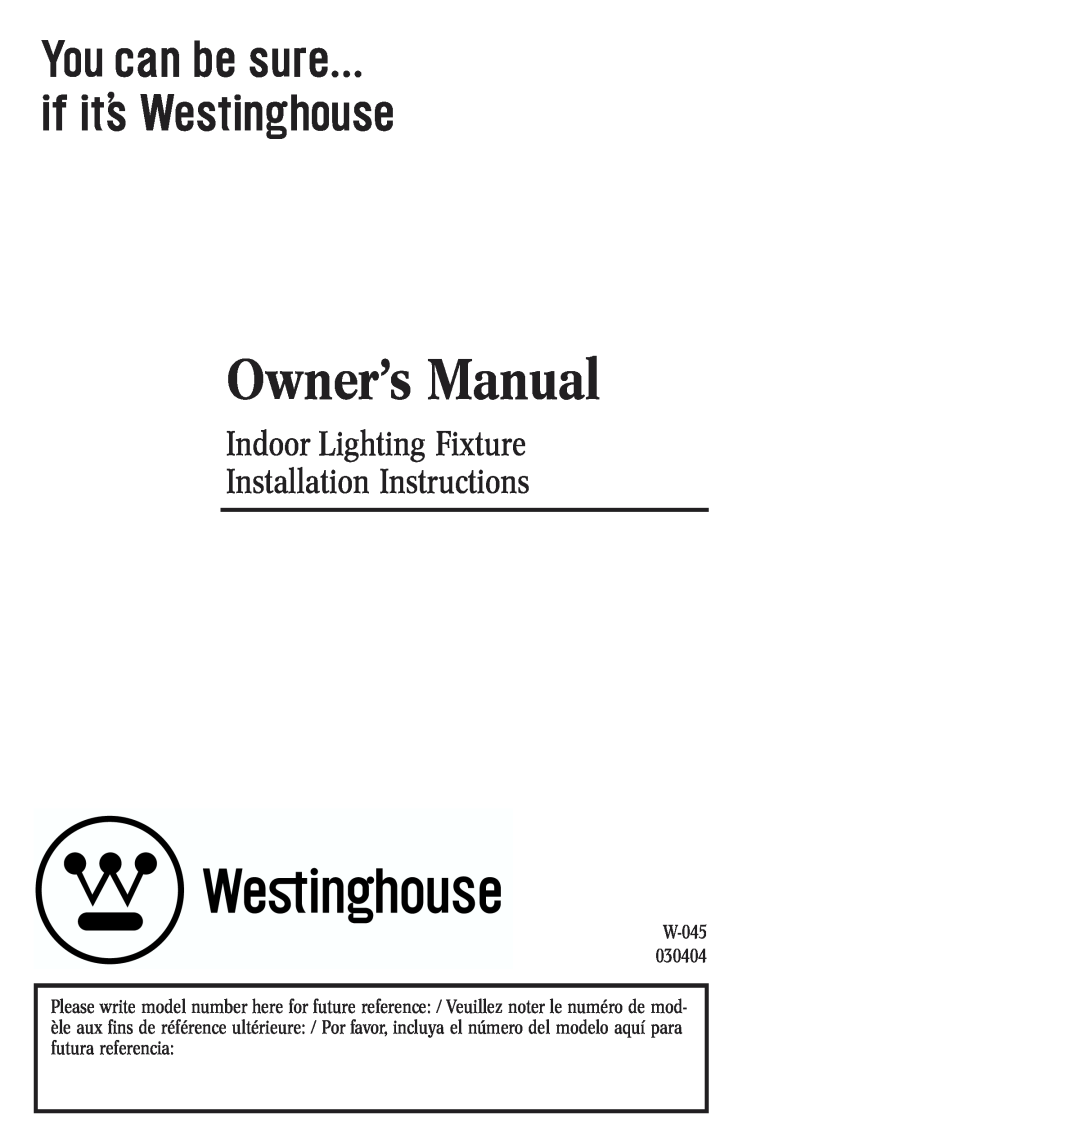 Westinghouse W-045 030404 owner manual Indoor Lighting Fixture Installation Instructions 